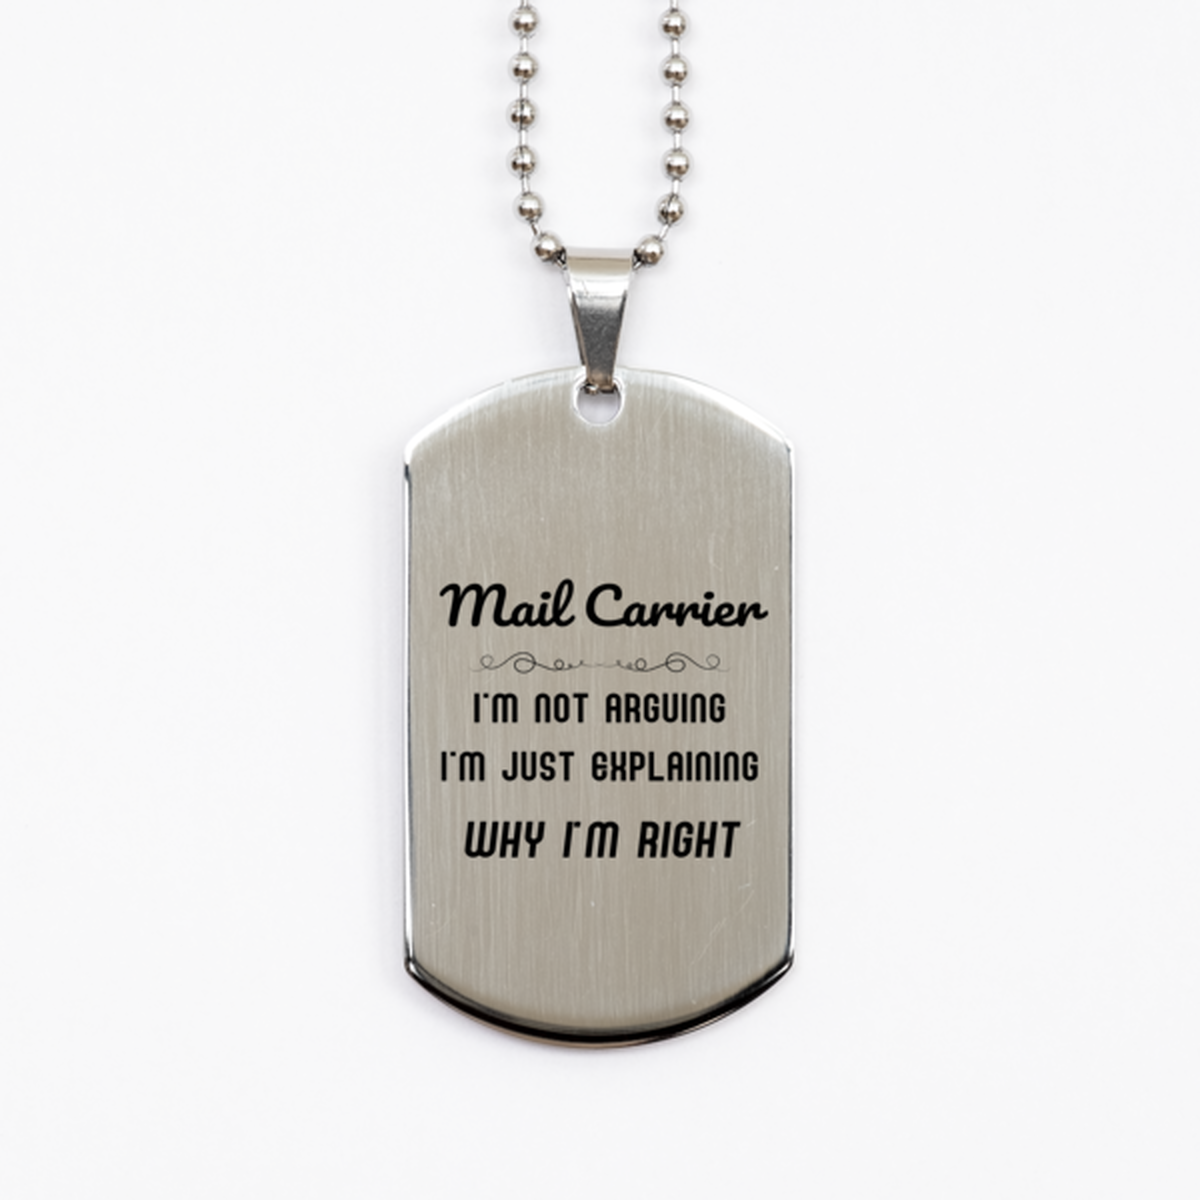 Mail Carrier I'm not Arguing. I'm Just Explaining Why I'm RIGHT Silver Dog Tag, Funny Saying Quote Mail Carrier Gifts For Mail Carrier Graduation Birthday Christmas Gifts for Men Women Coworker